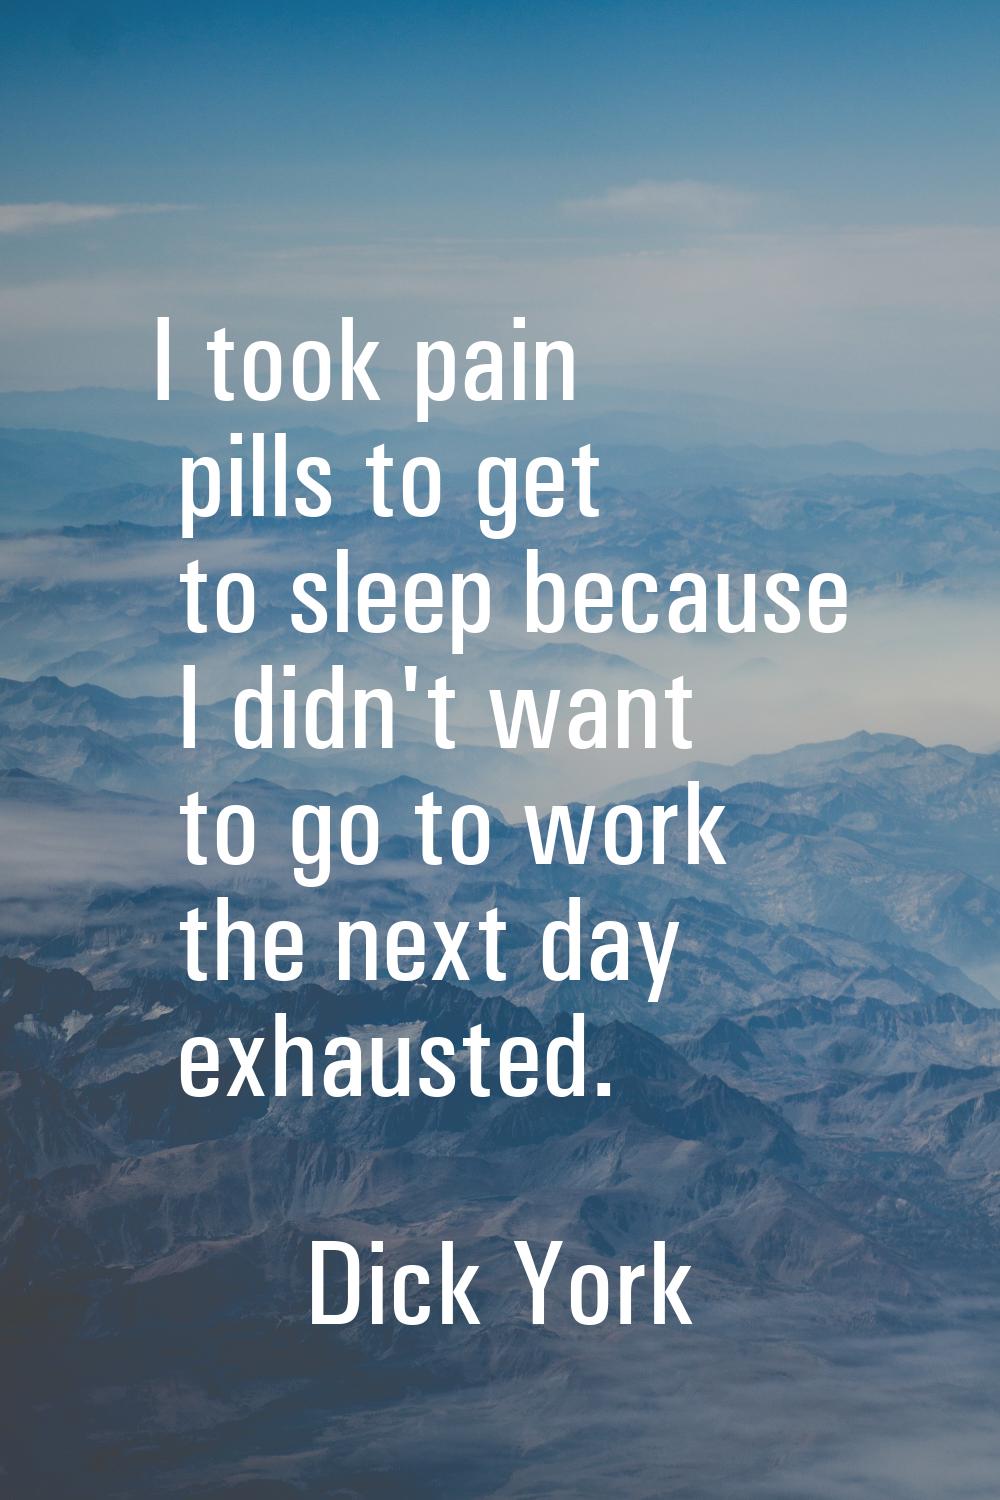 I took pain pills to get to sleep because I didn't want to go to work the next day exhausted.